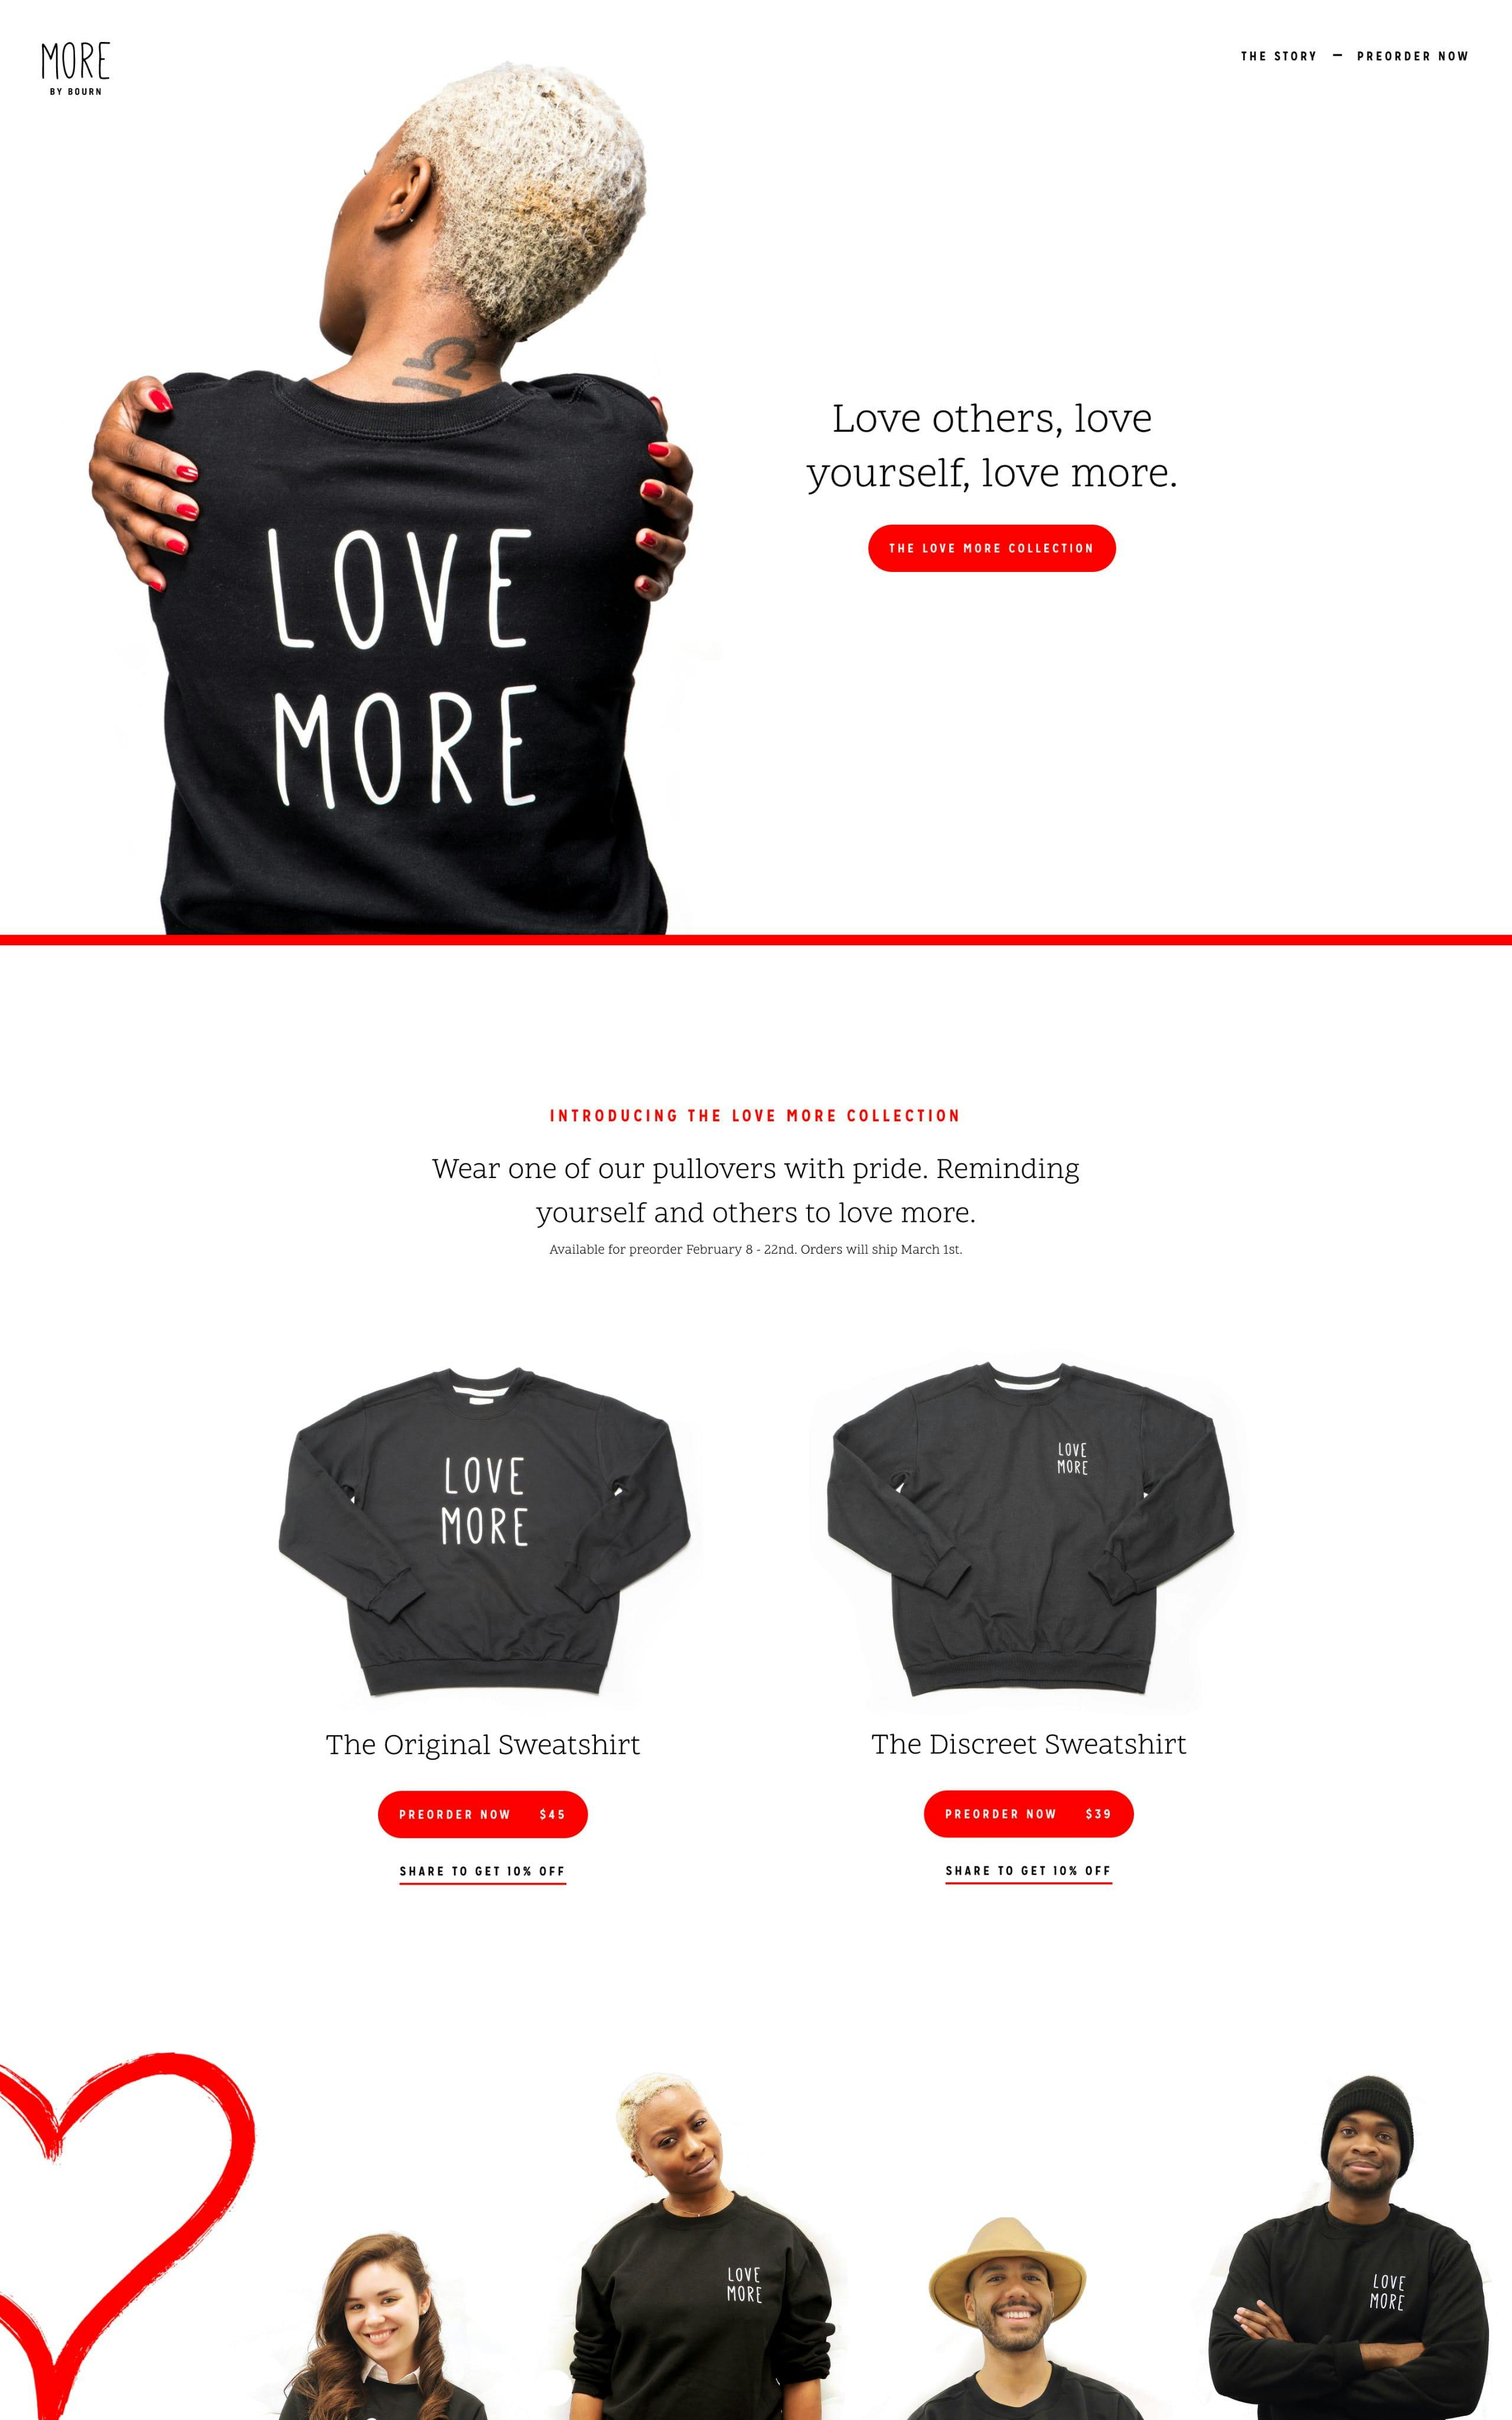 MORE by Bourn: Love More Website Screenshot